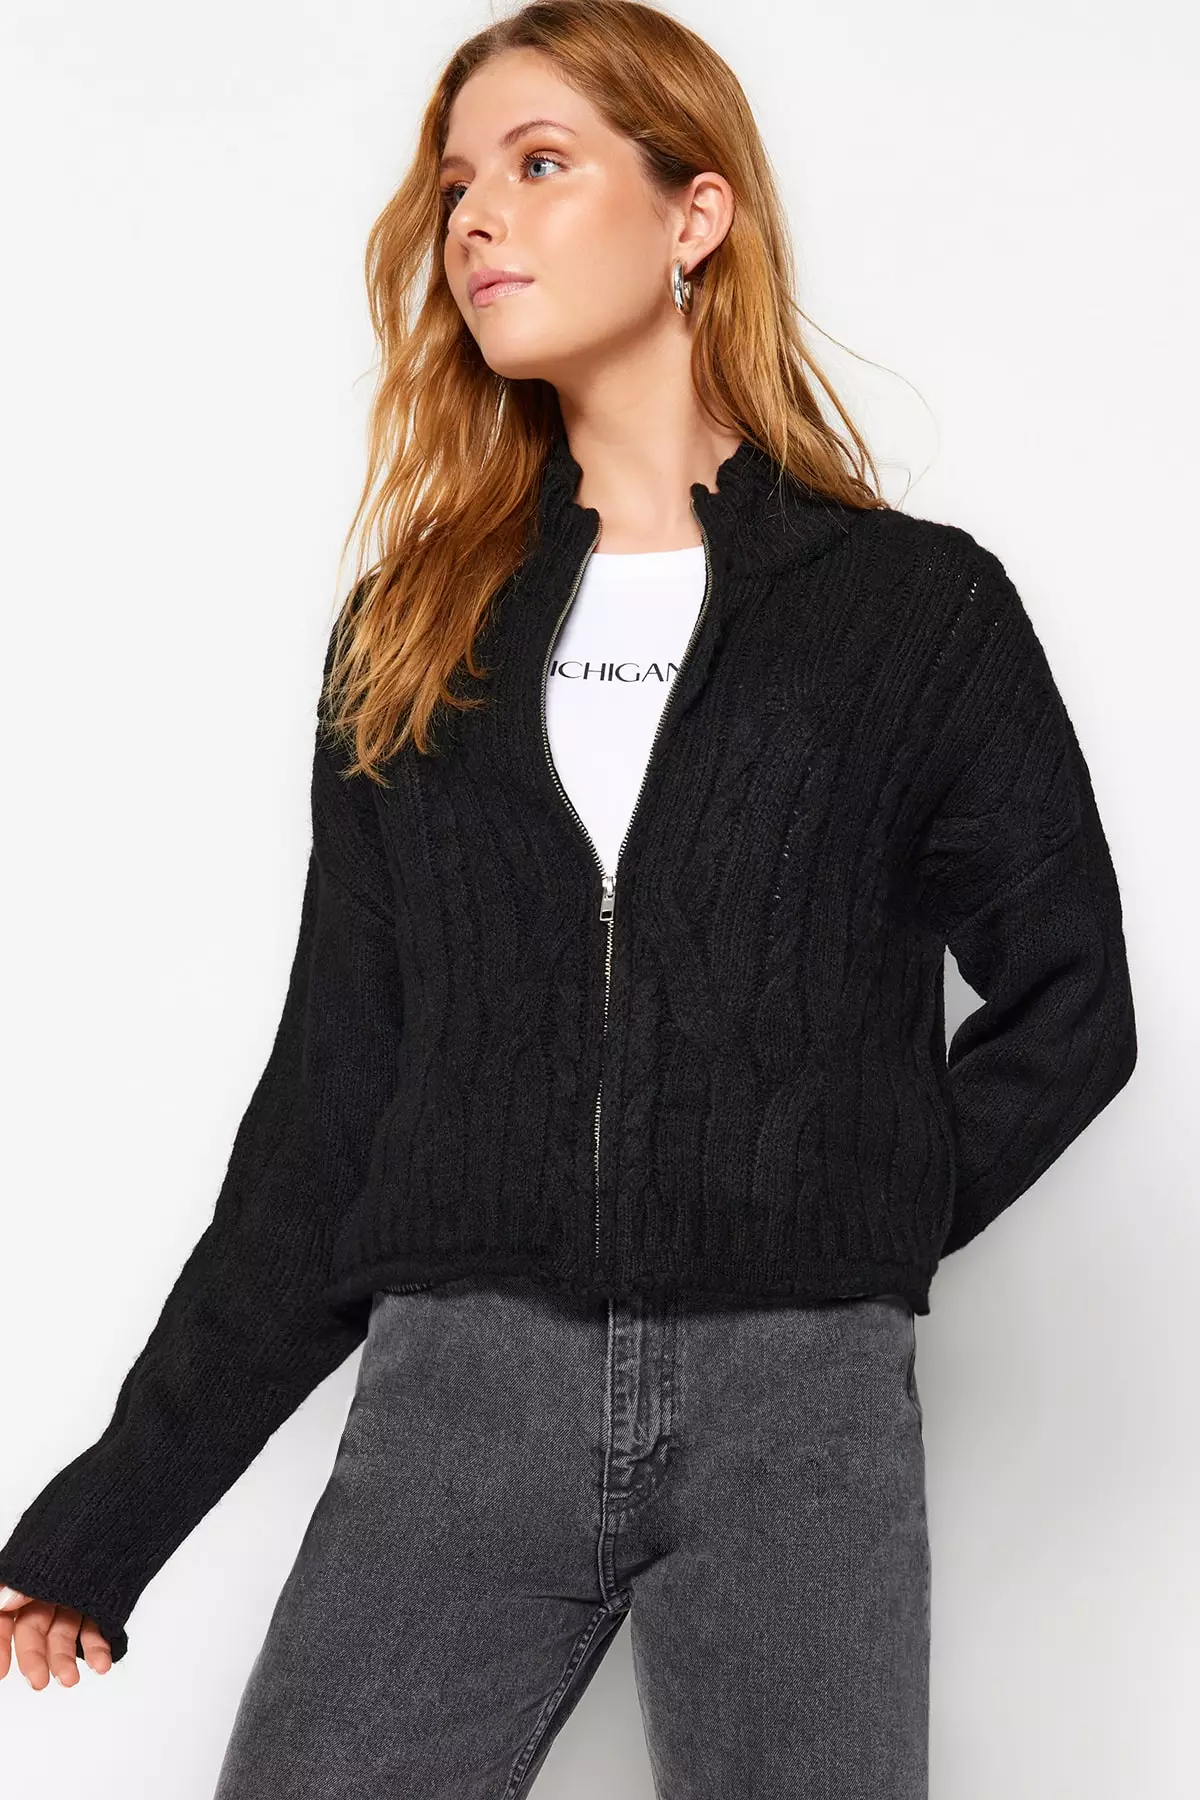 Trendyol Soft Textured Sweater Cardigan with Zipper and Braids 2024, Buy  Trendyol Online